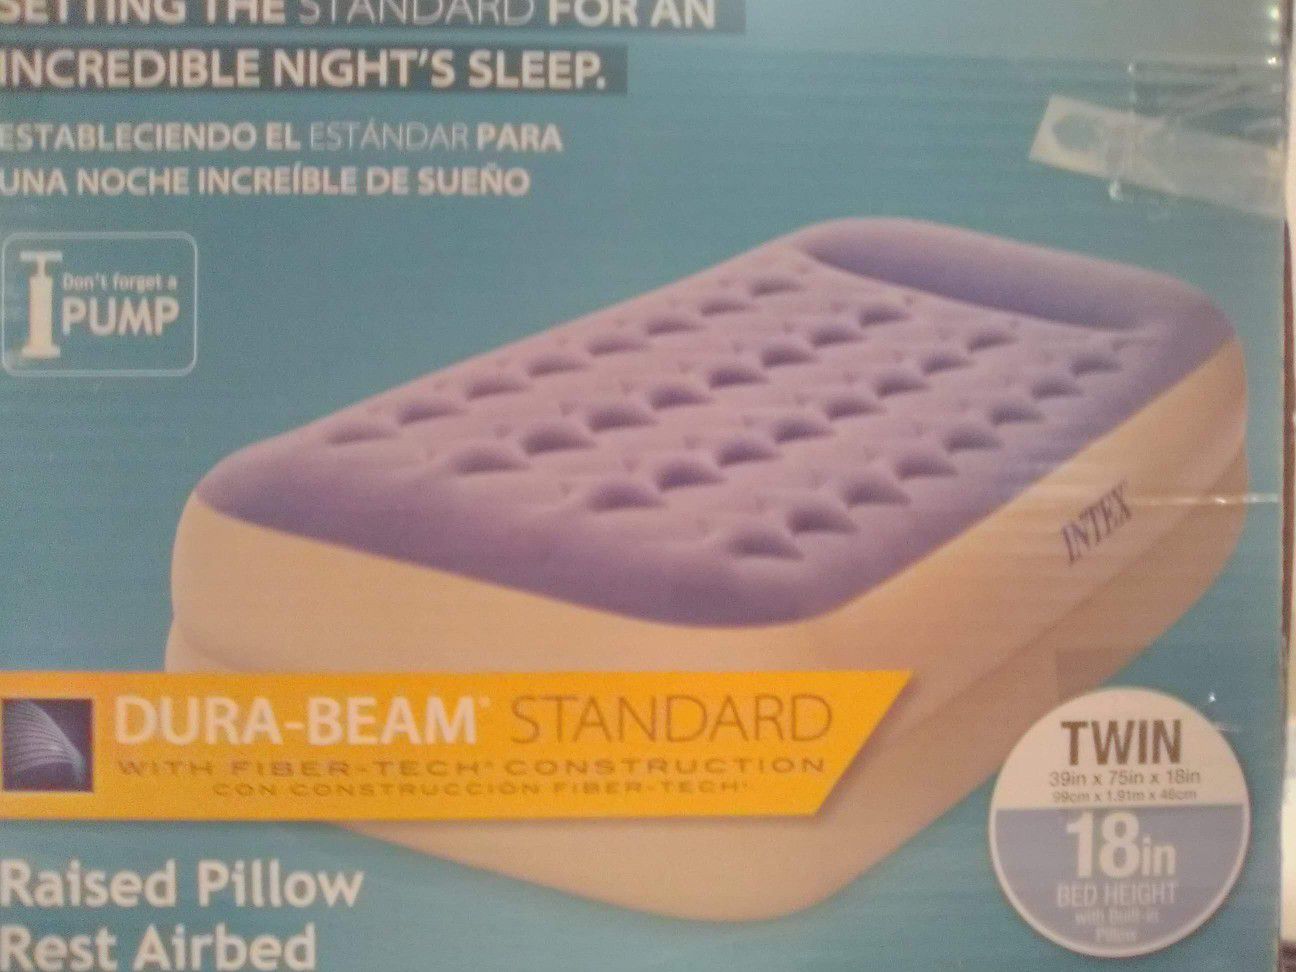 Brand New, Never used Air mattress, built in pillows and electric pump